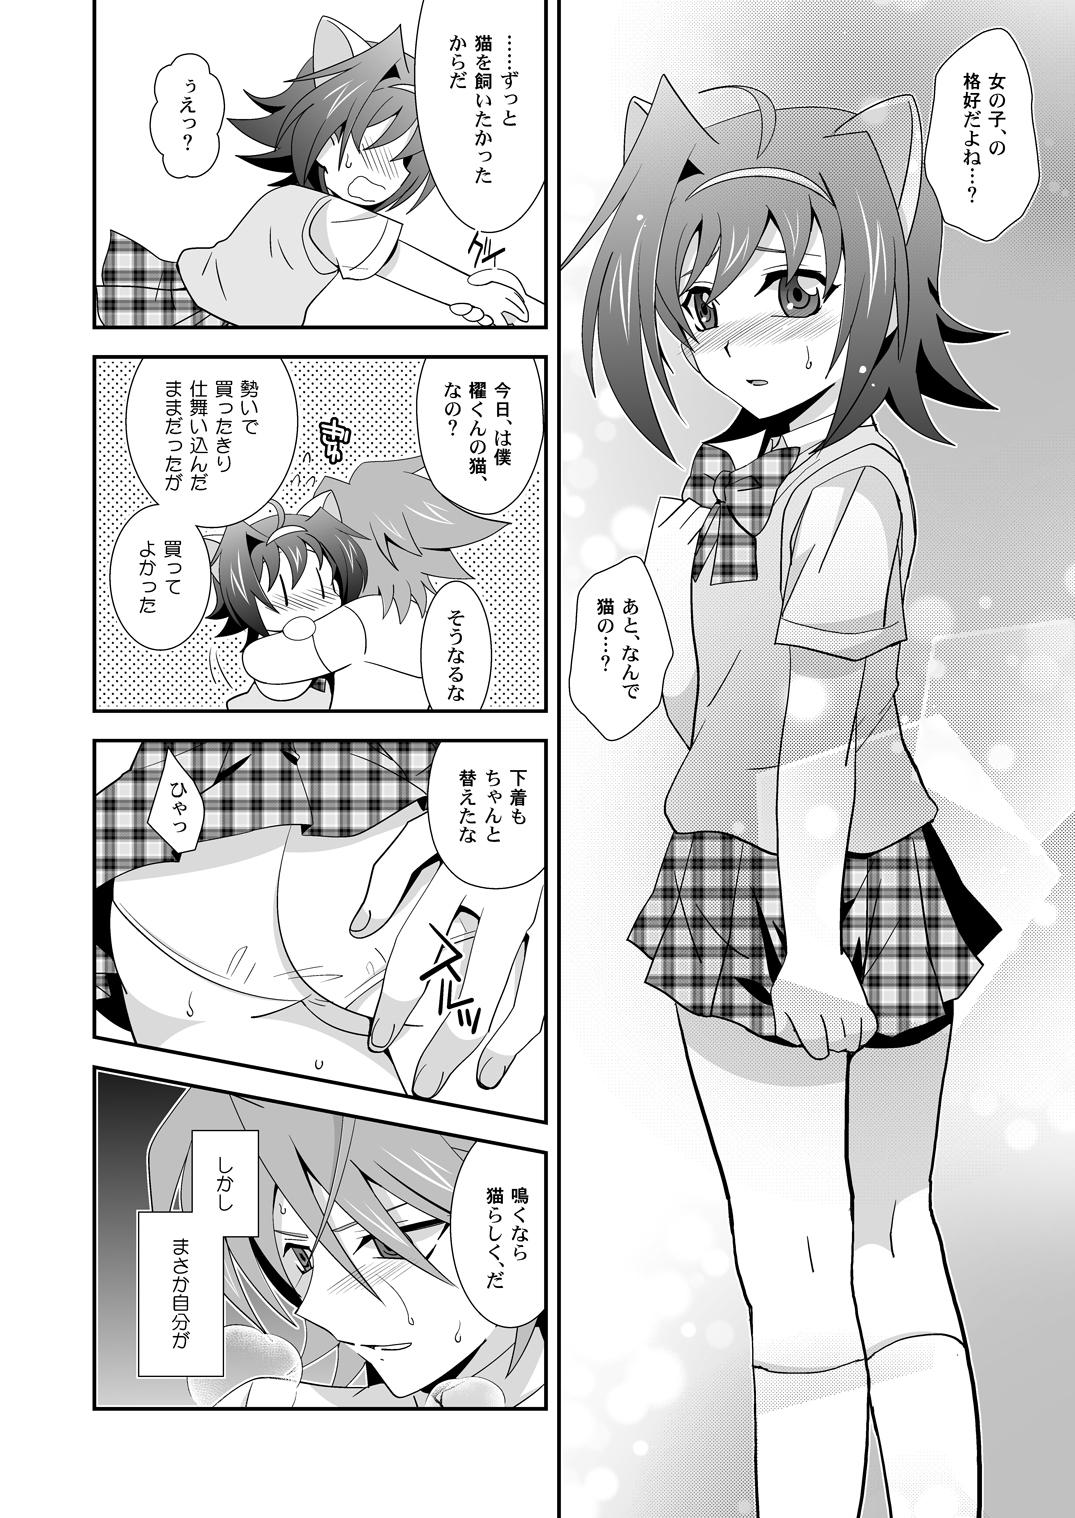 Freckles Toshiki×toxic! - Cardfight vanguard Maid - Page 13